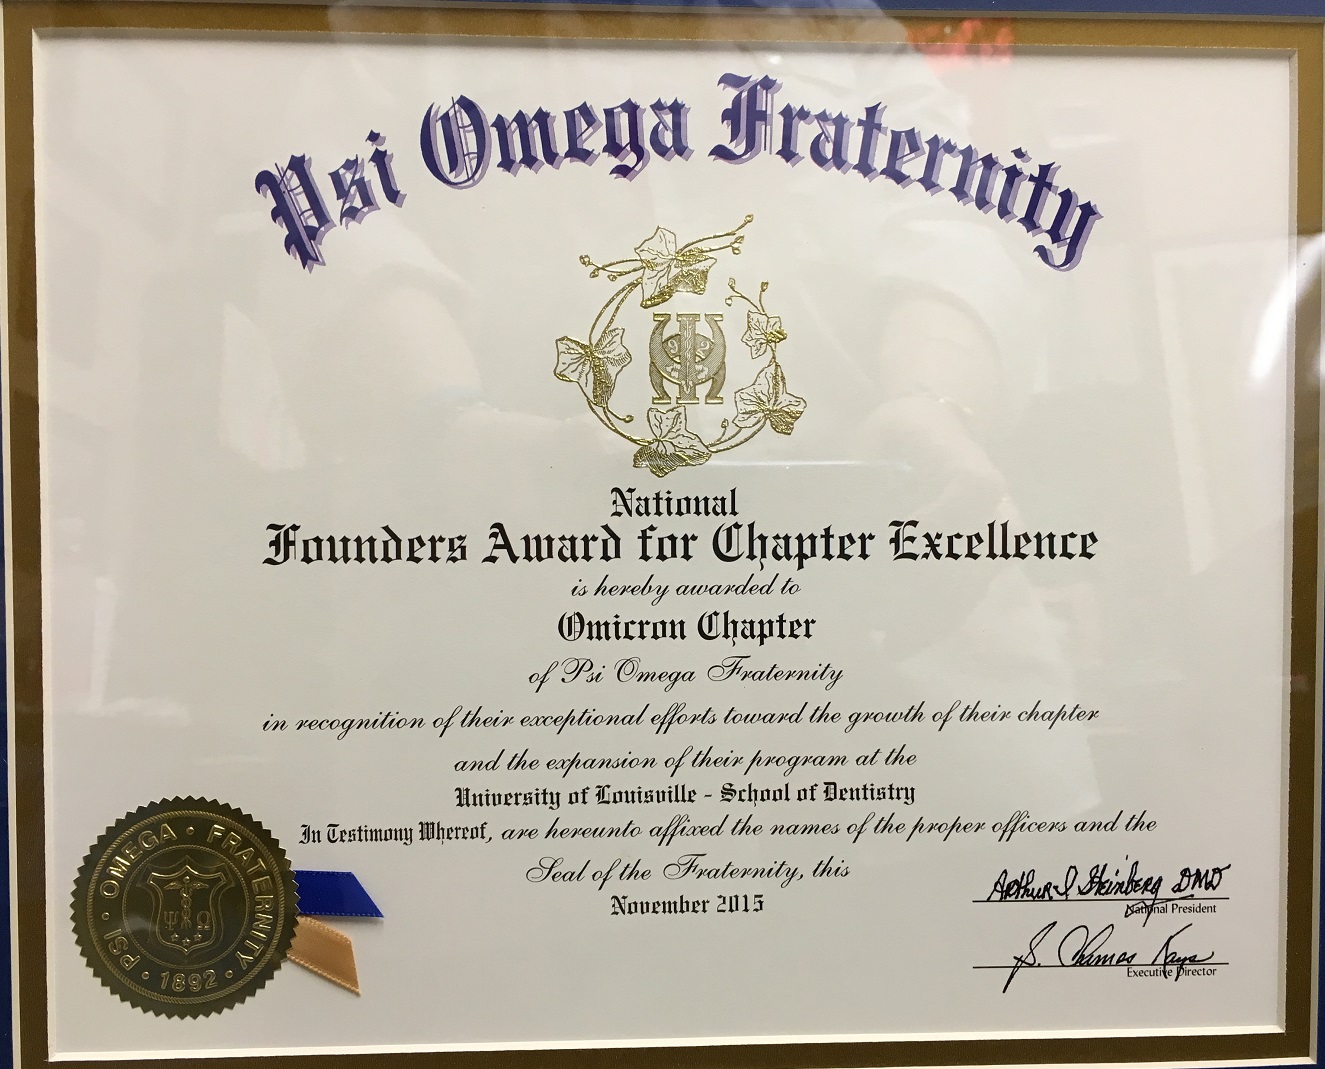 Psi Omega Fraternity, Omicron Chapter wins national award 